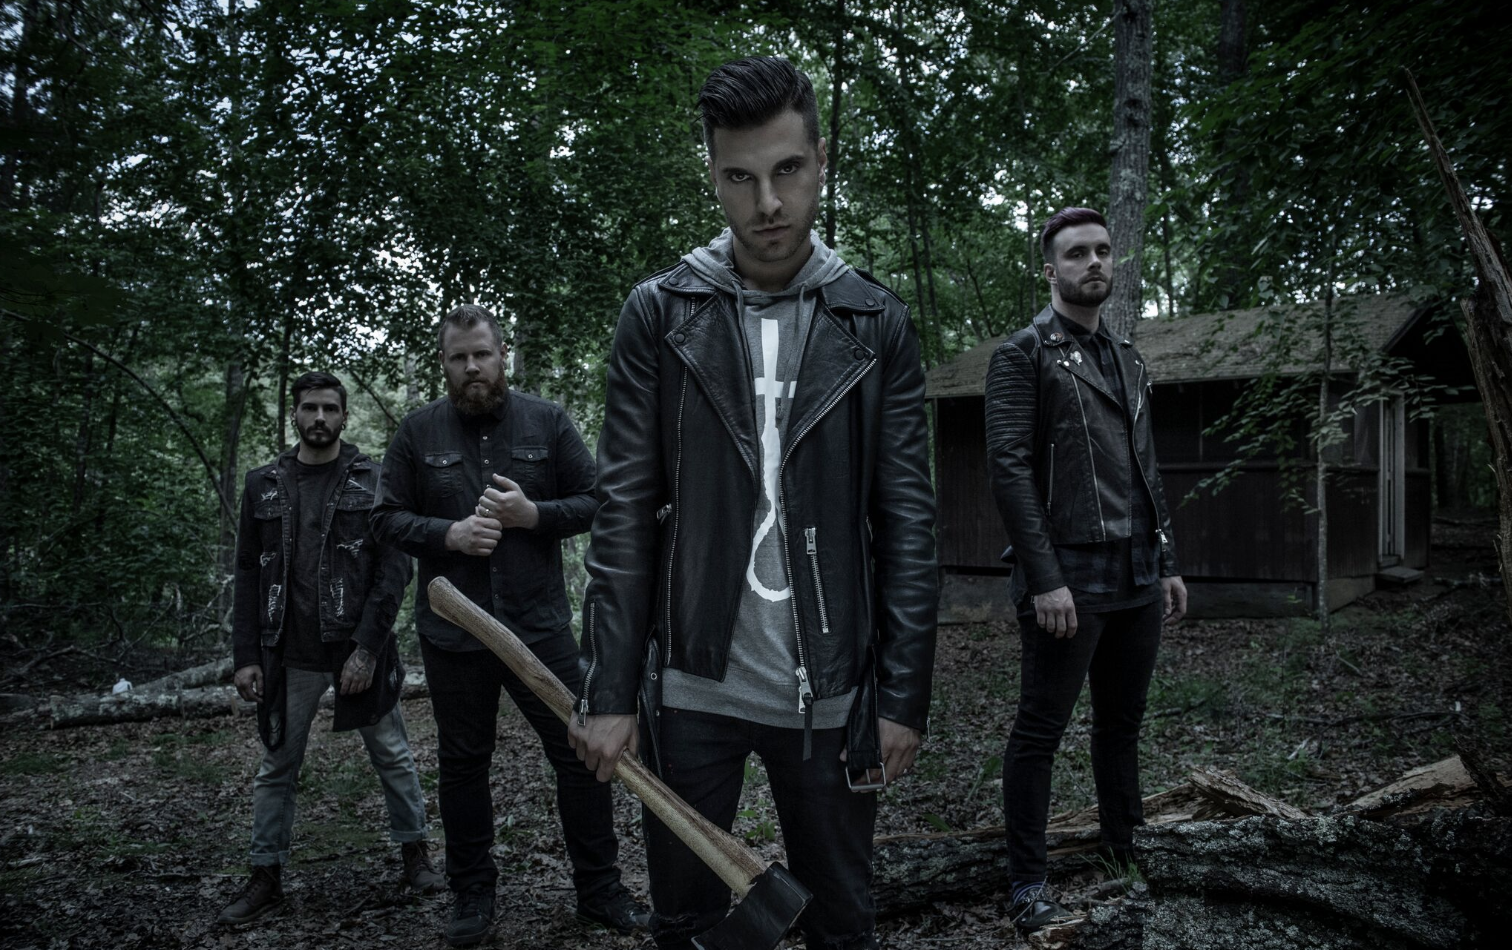 Ice Nine Kills Are Releasing A Deluxe Version Of Their Album 'The